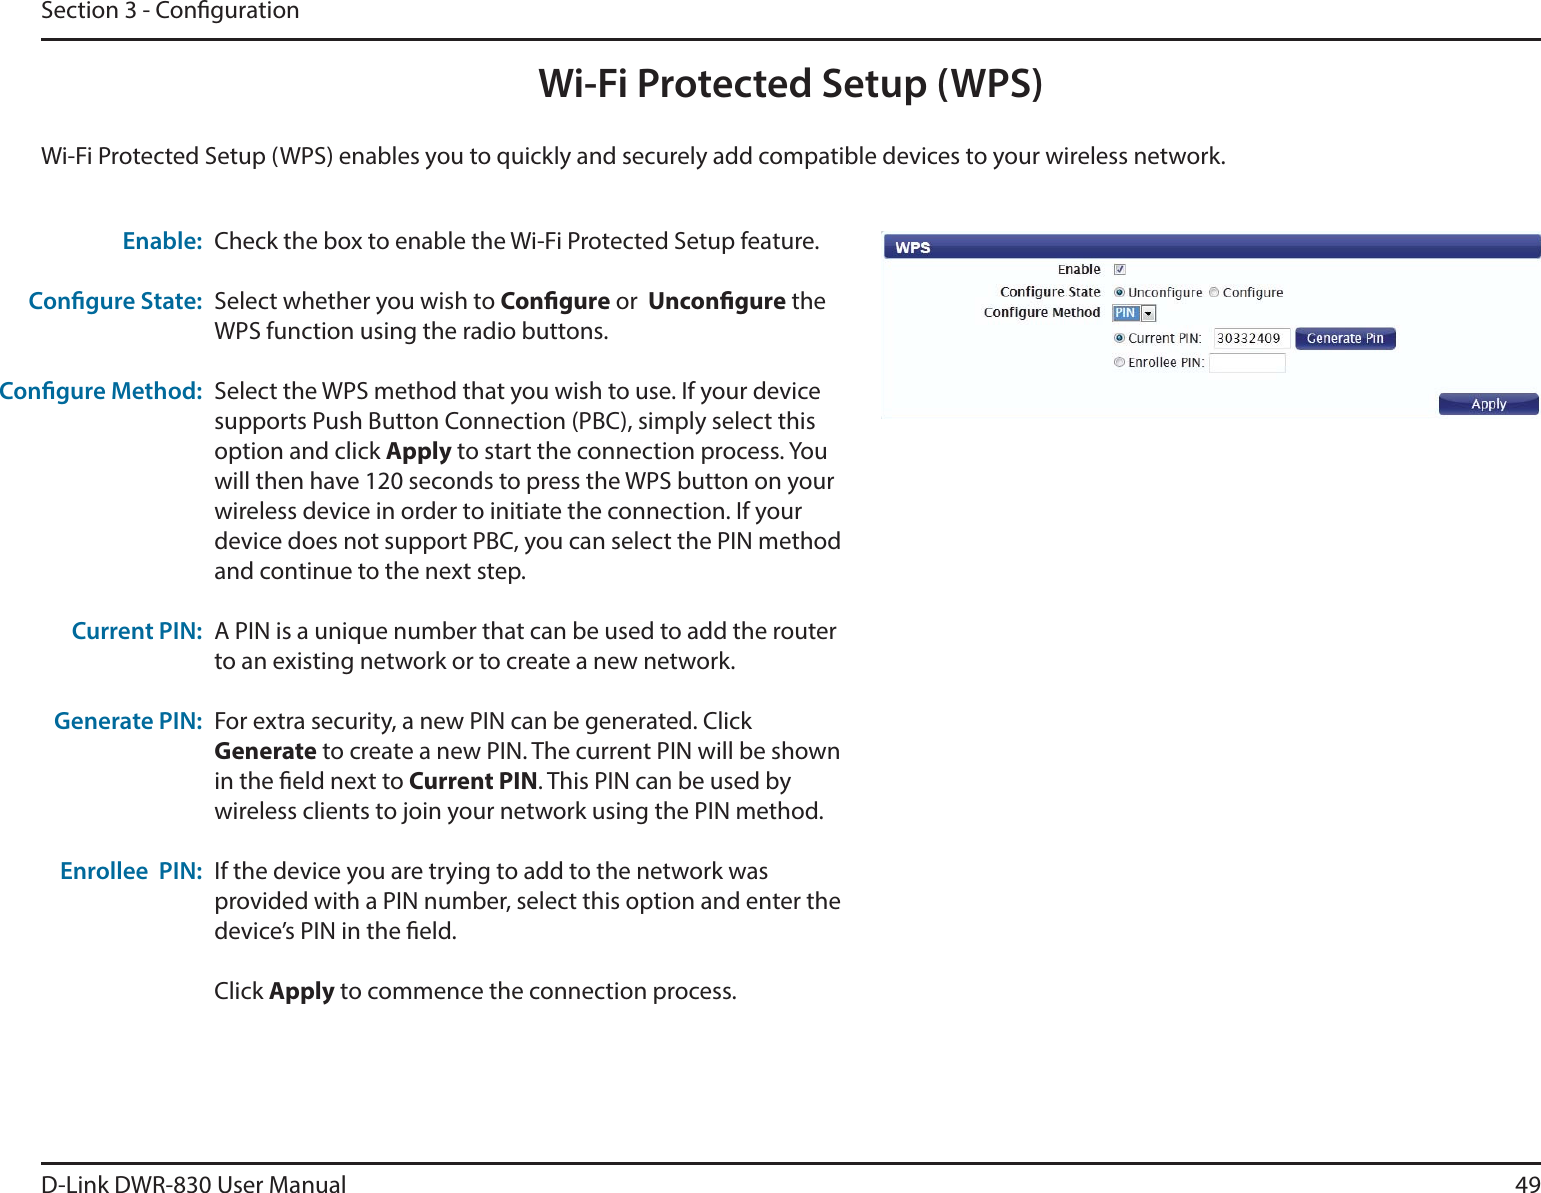 D-Link DWR-830 User Manual 49Section 3 - CongurationWi-Fi Protected Setup (WPS)Check the box to enable the Wi-Fi Protected Setup feature.Select whether you wish to Congure or  Uncongure the WPS function using the radio buttons.Select the WPS method that you wish to use. If your device supports Push Button Connection (PBC), simply select this option and click Apply to start the connection process. You will then have 120 seconds to press the WPS button on your wireless device in order to initiate the connection. If your device does not support PBC, you can select the PIN method and continue to the next step.A PIN is a unique number that can be used to add the router to an existing network or to create a new network. For extra security, a new PIN can be generated. Click Generate to create a new PIN. The current PIN will be shown in the eld next to Current PIN. This PIN can be used by wireless clients to join your network using the PIN method.If the device you are trying to add to the network was provided with a PIN number, select this option and enter the device’s PIN in the eld. Click Apply to commence the connection process. Enable:Congure State:Congure Method:Current PIN:Generate PIN:Enrollee  PIN:Wi-Fi Protected Setup (WPS) enables you to quickly and securely add compatible devices to your wireless network. 